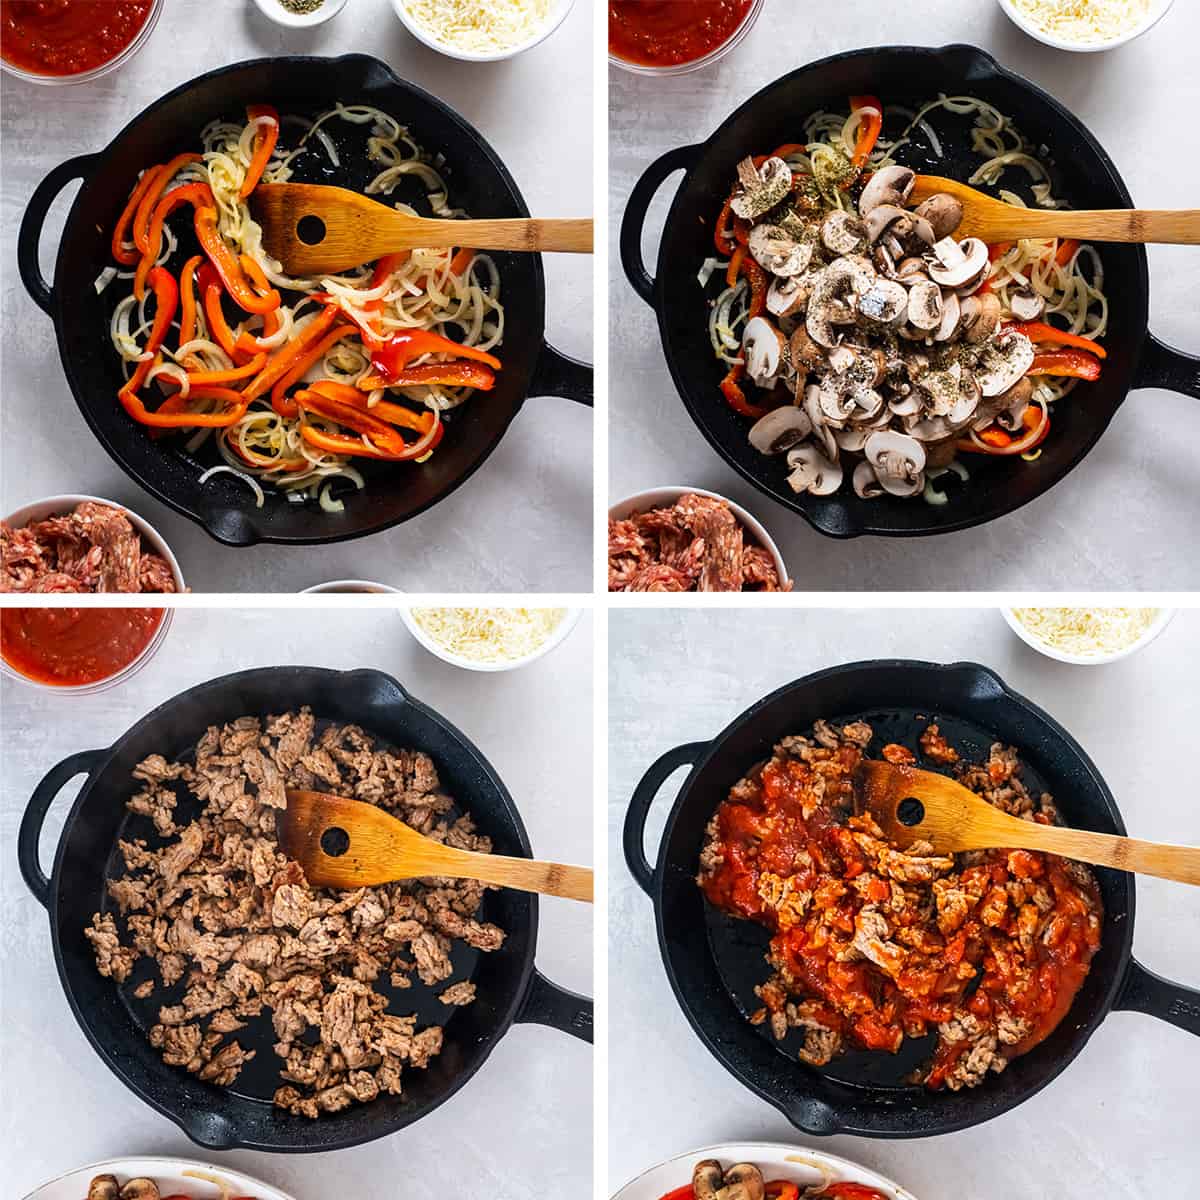 Four images of peppers, onions, and mushrooms and ground Italian sausage with marinara sauce cooking in a cast iron skillet.